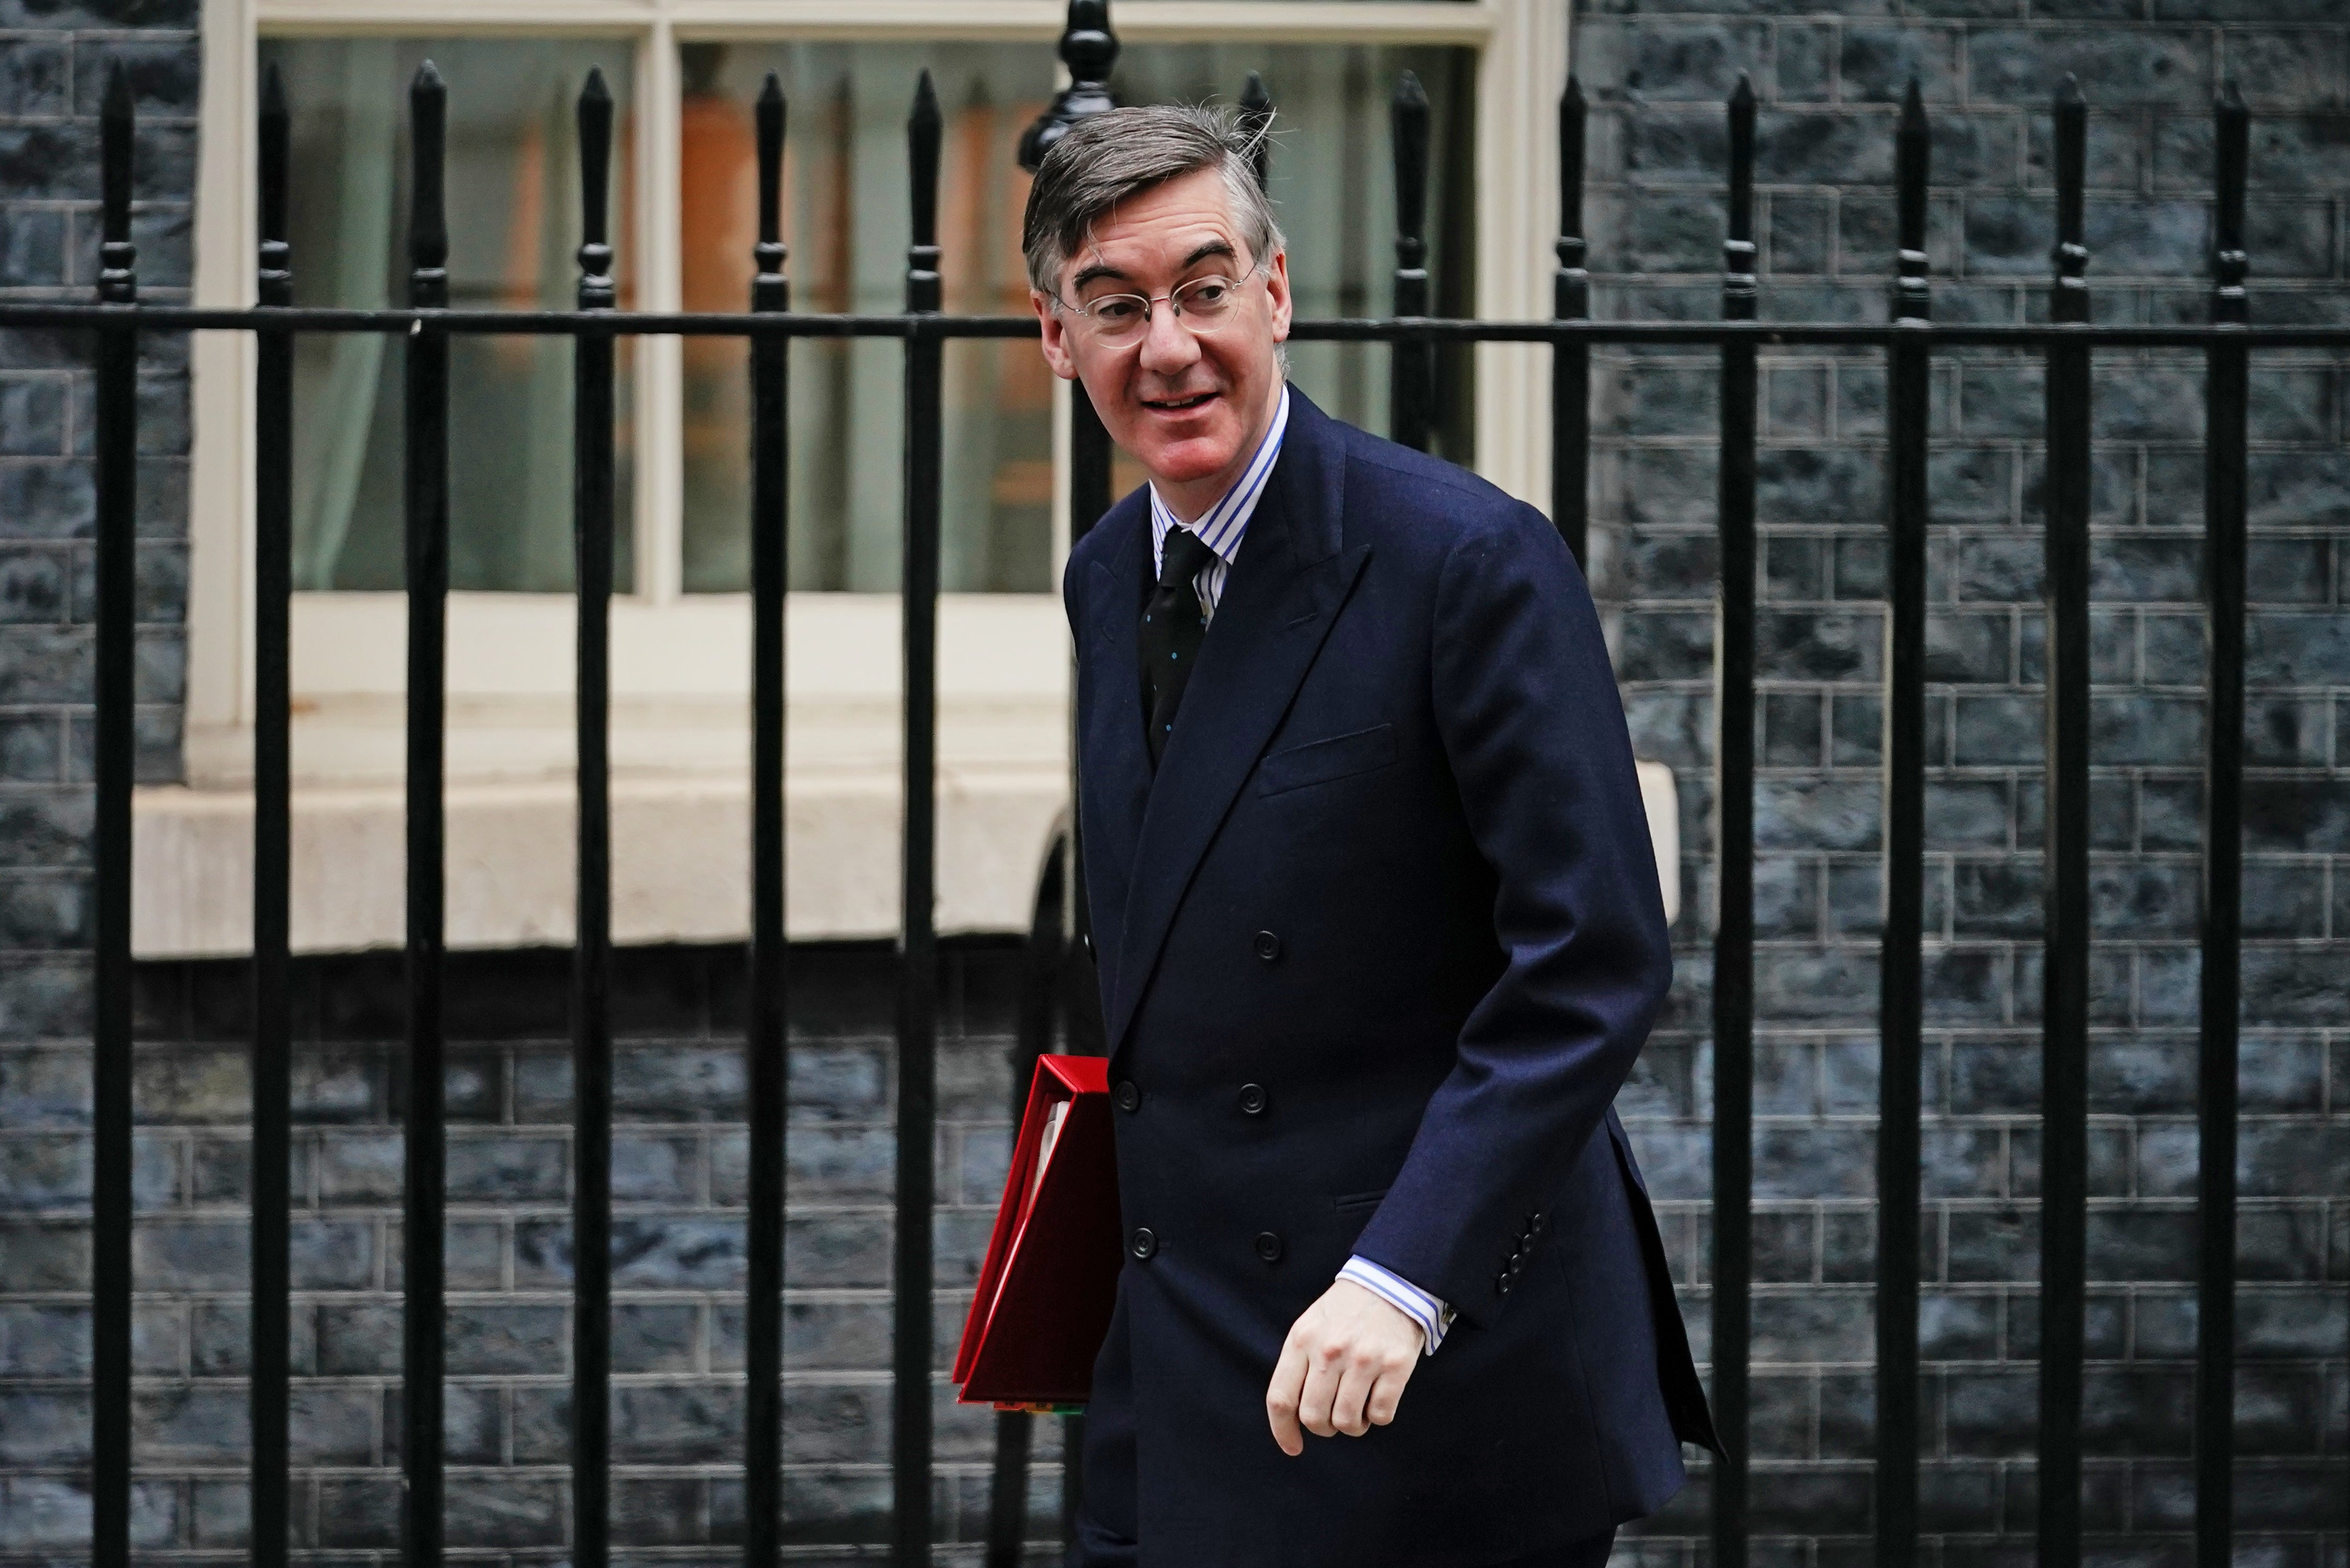 Jacob Rees-Mogg said the Government’s intentions with the policy are good (Aaron Chown/PA)